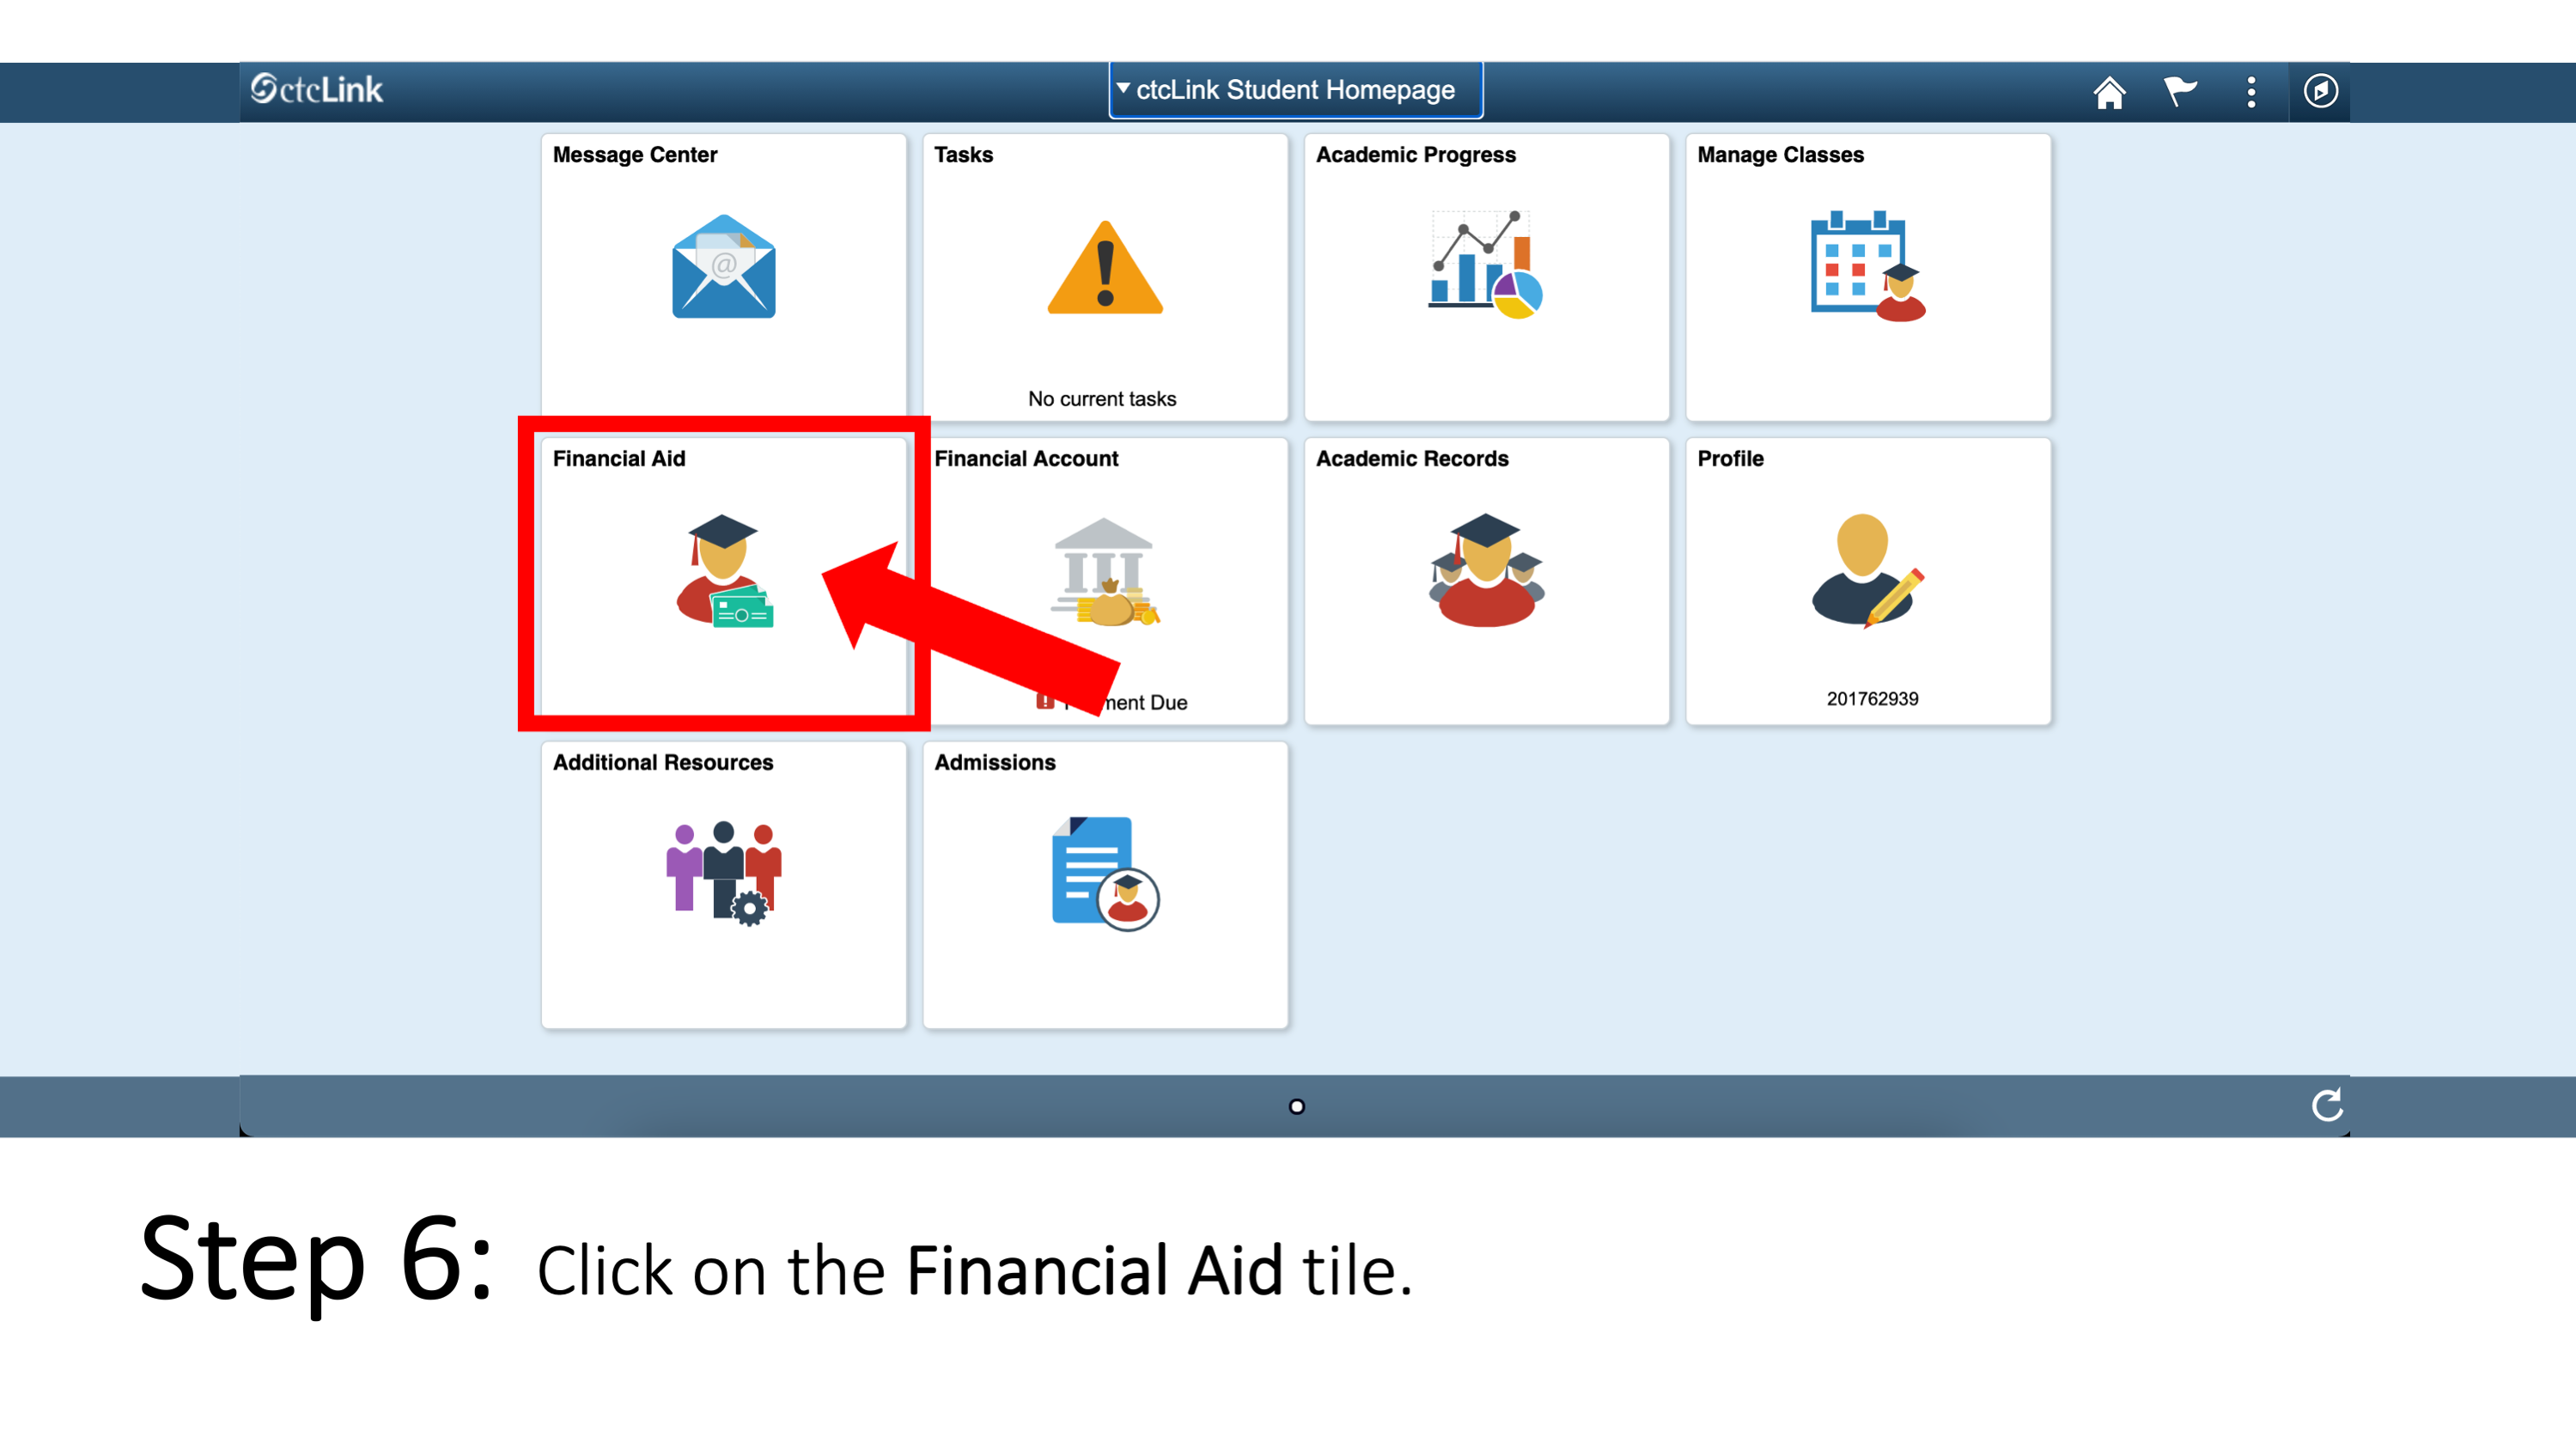 Step 6: Click on the Financial Aid tile.